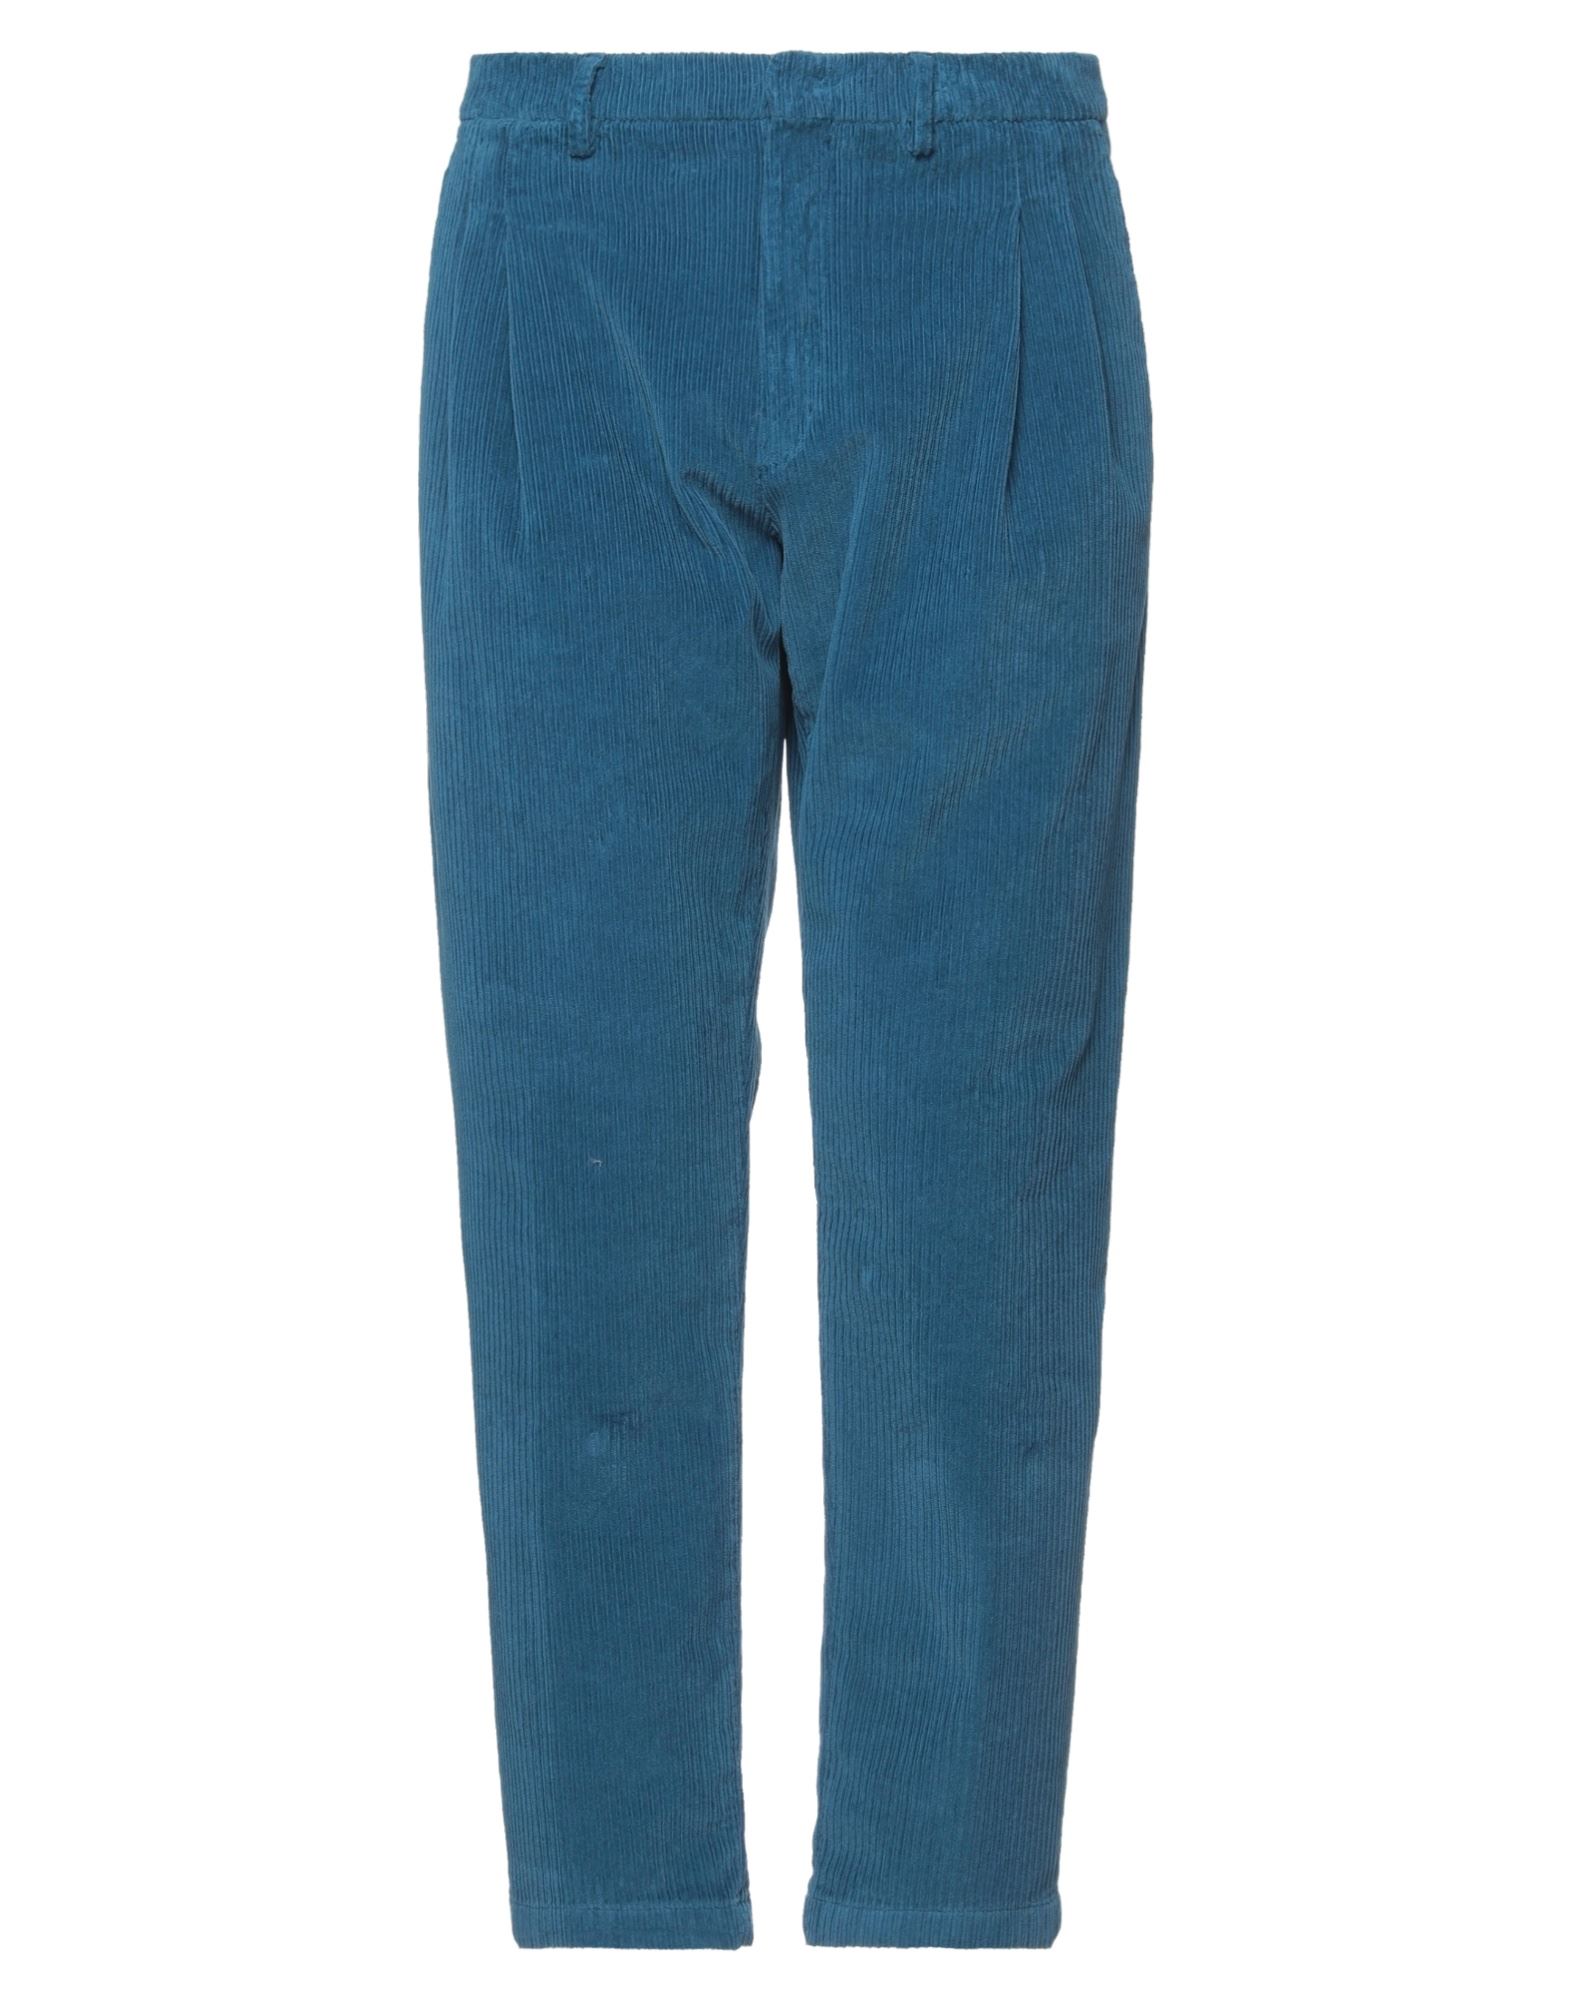 Be Able Pants In Slate Blue